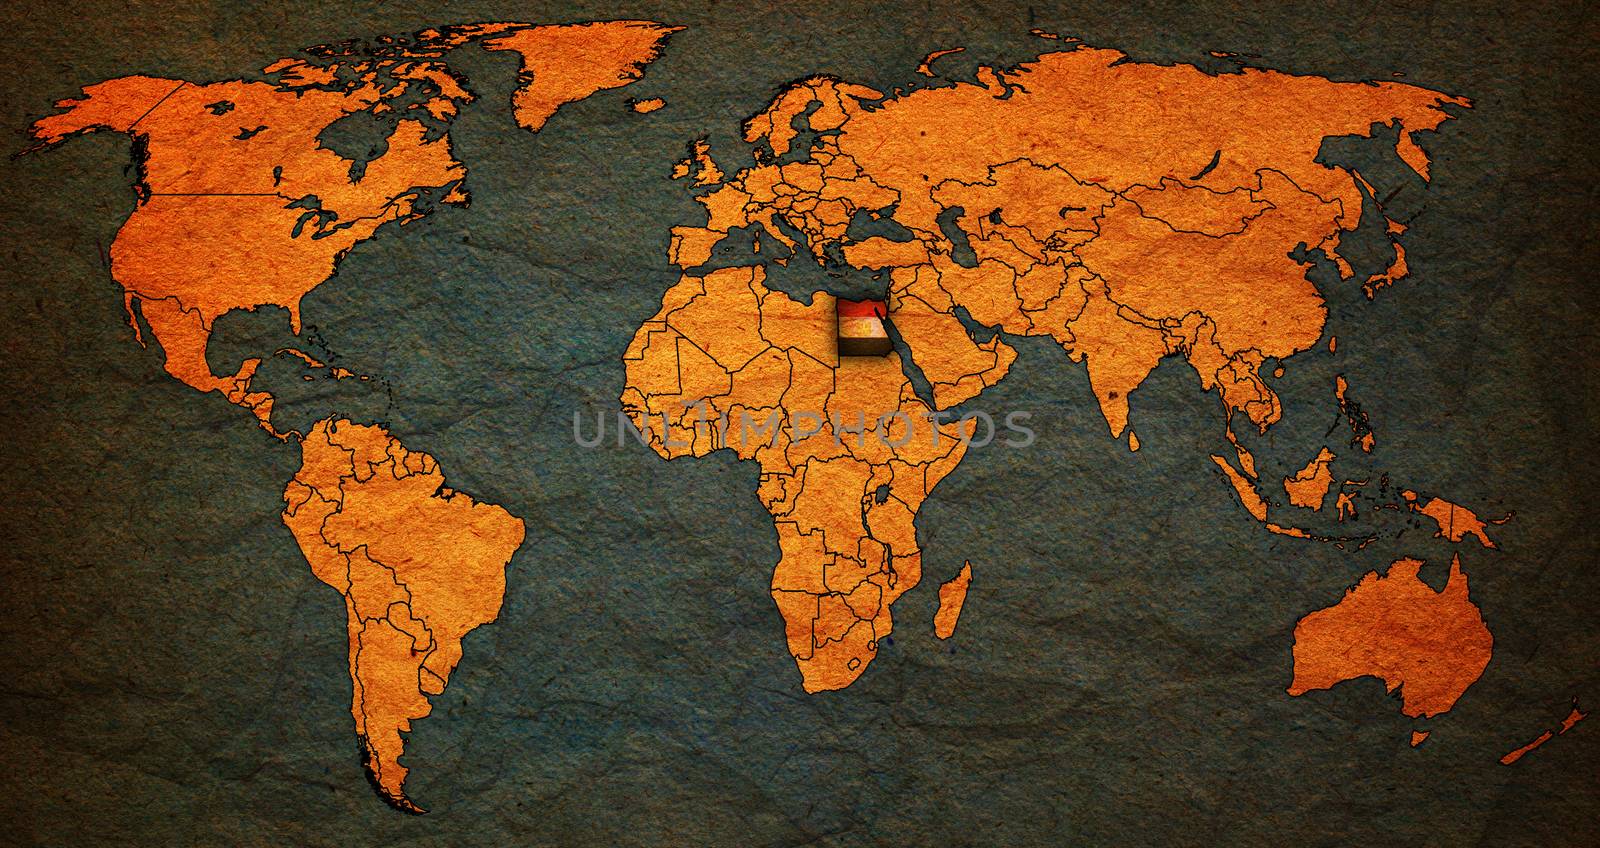 egypt territory on actual world map by michal812